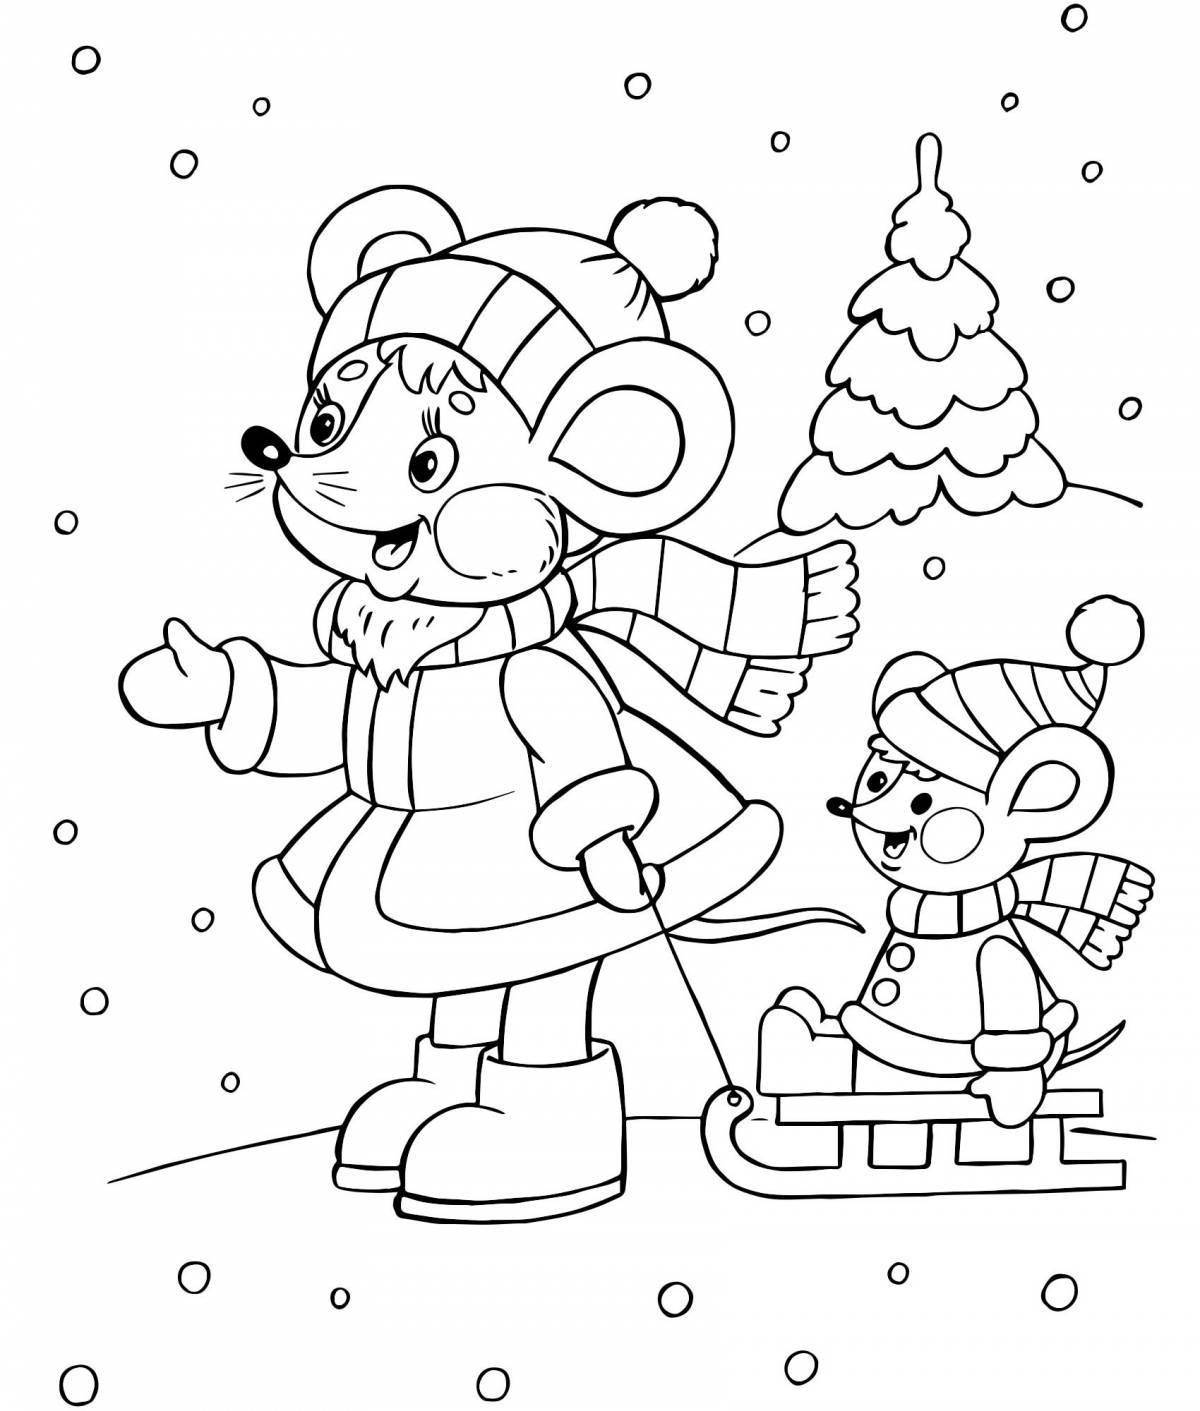 Exotic winter coloring book for children 4-5 years old